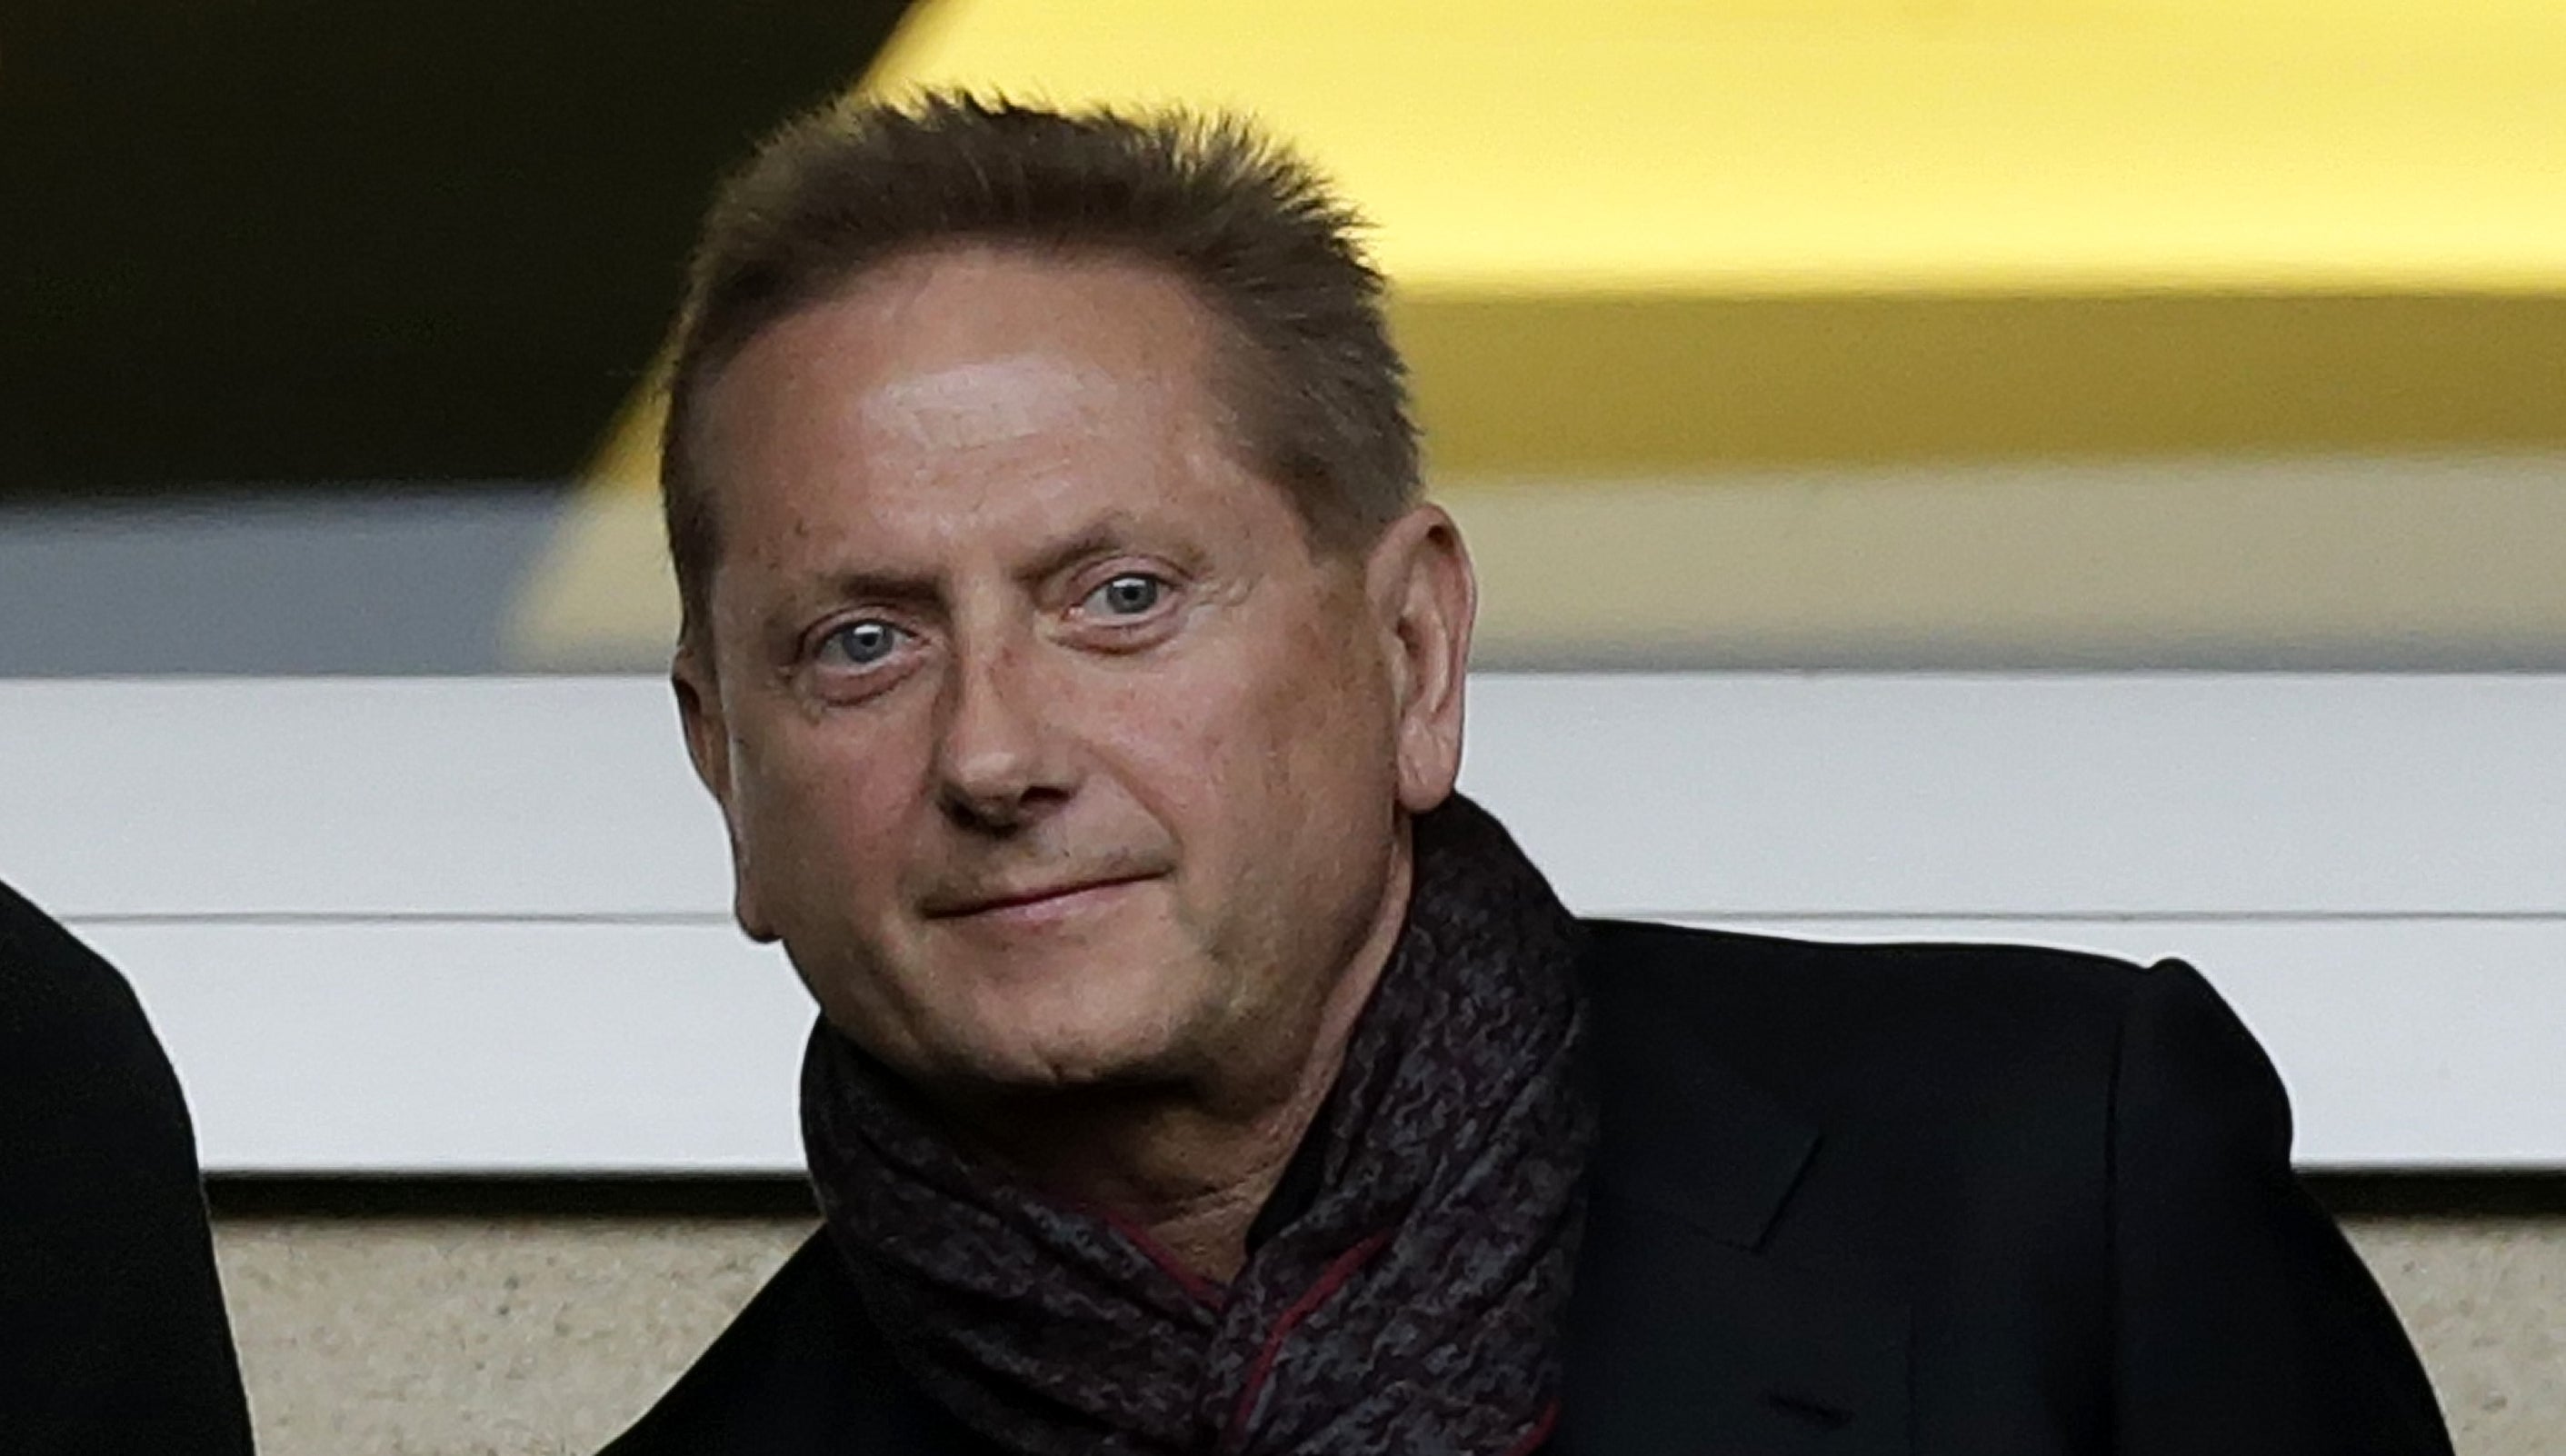 Vladimir Romanov bought Hearts FC in 2005 and his chaotic reign ended in 2013 (Danny Lawson/PA)